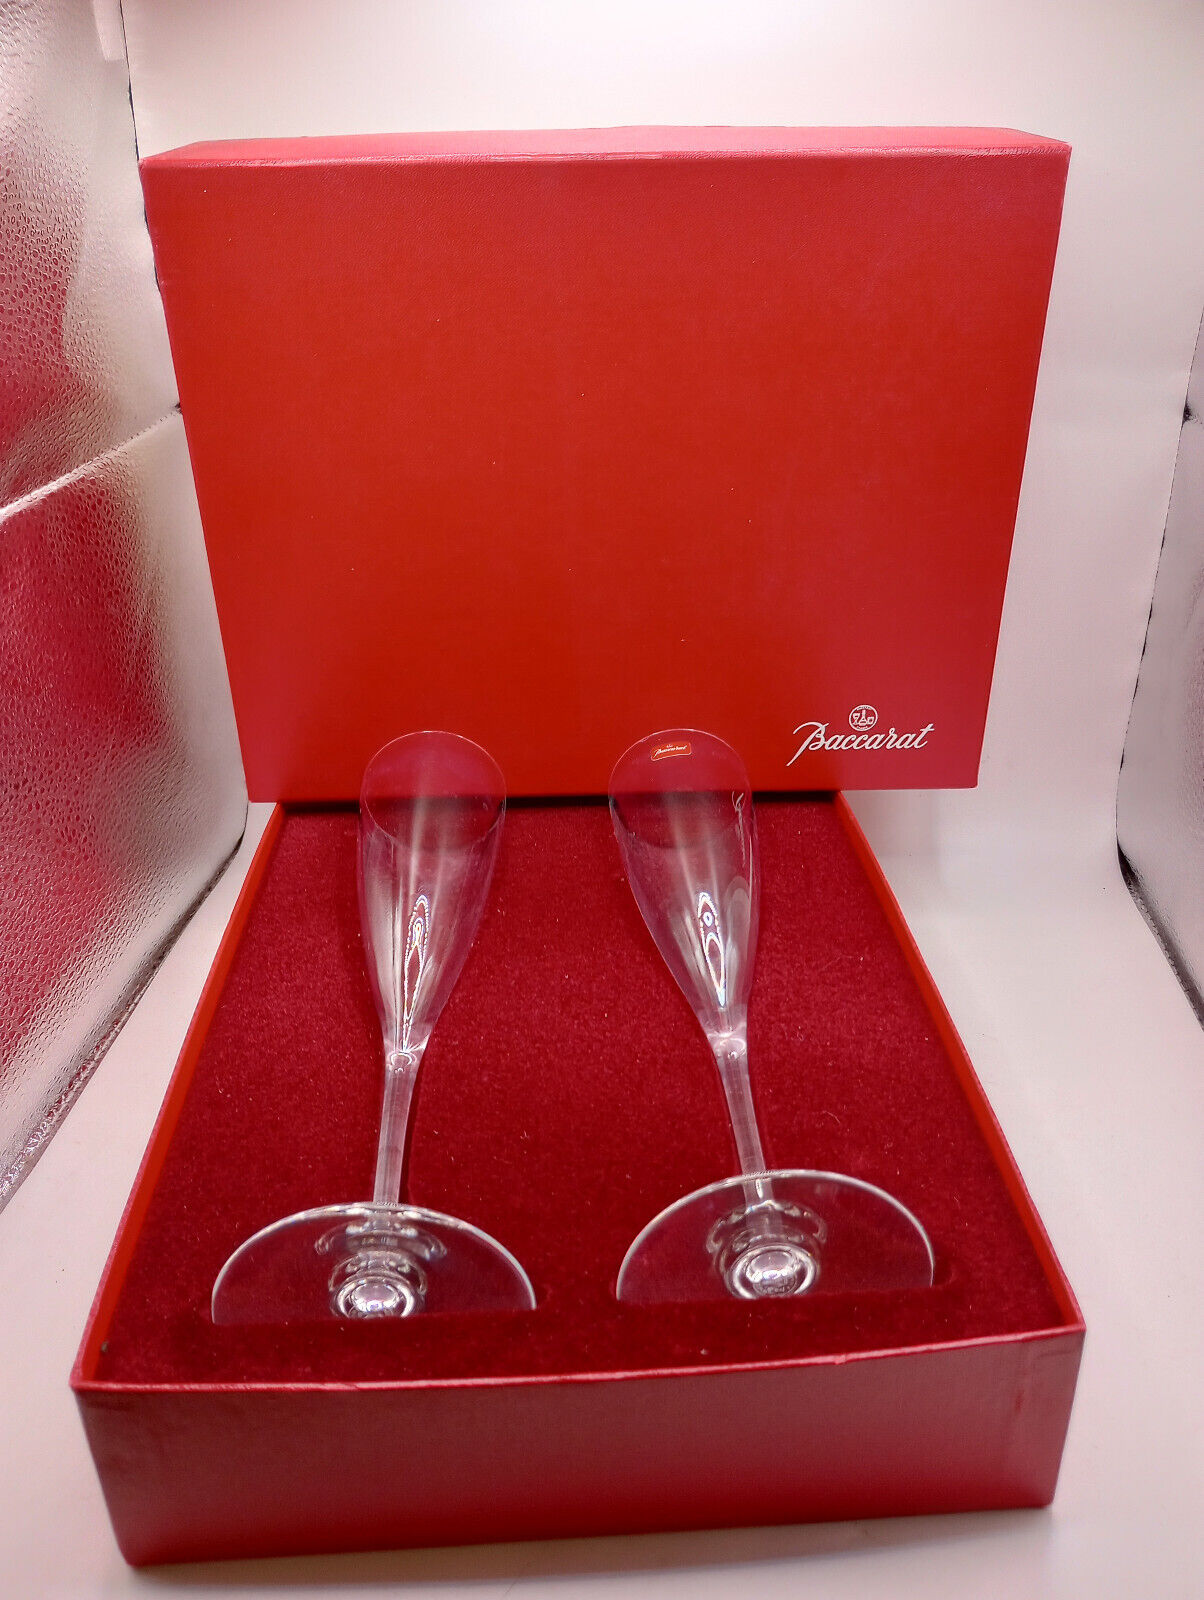 Pair of 2 Baccarat Dom Perignon Champagne Glasses, Leaded Crystal Baccarat